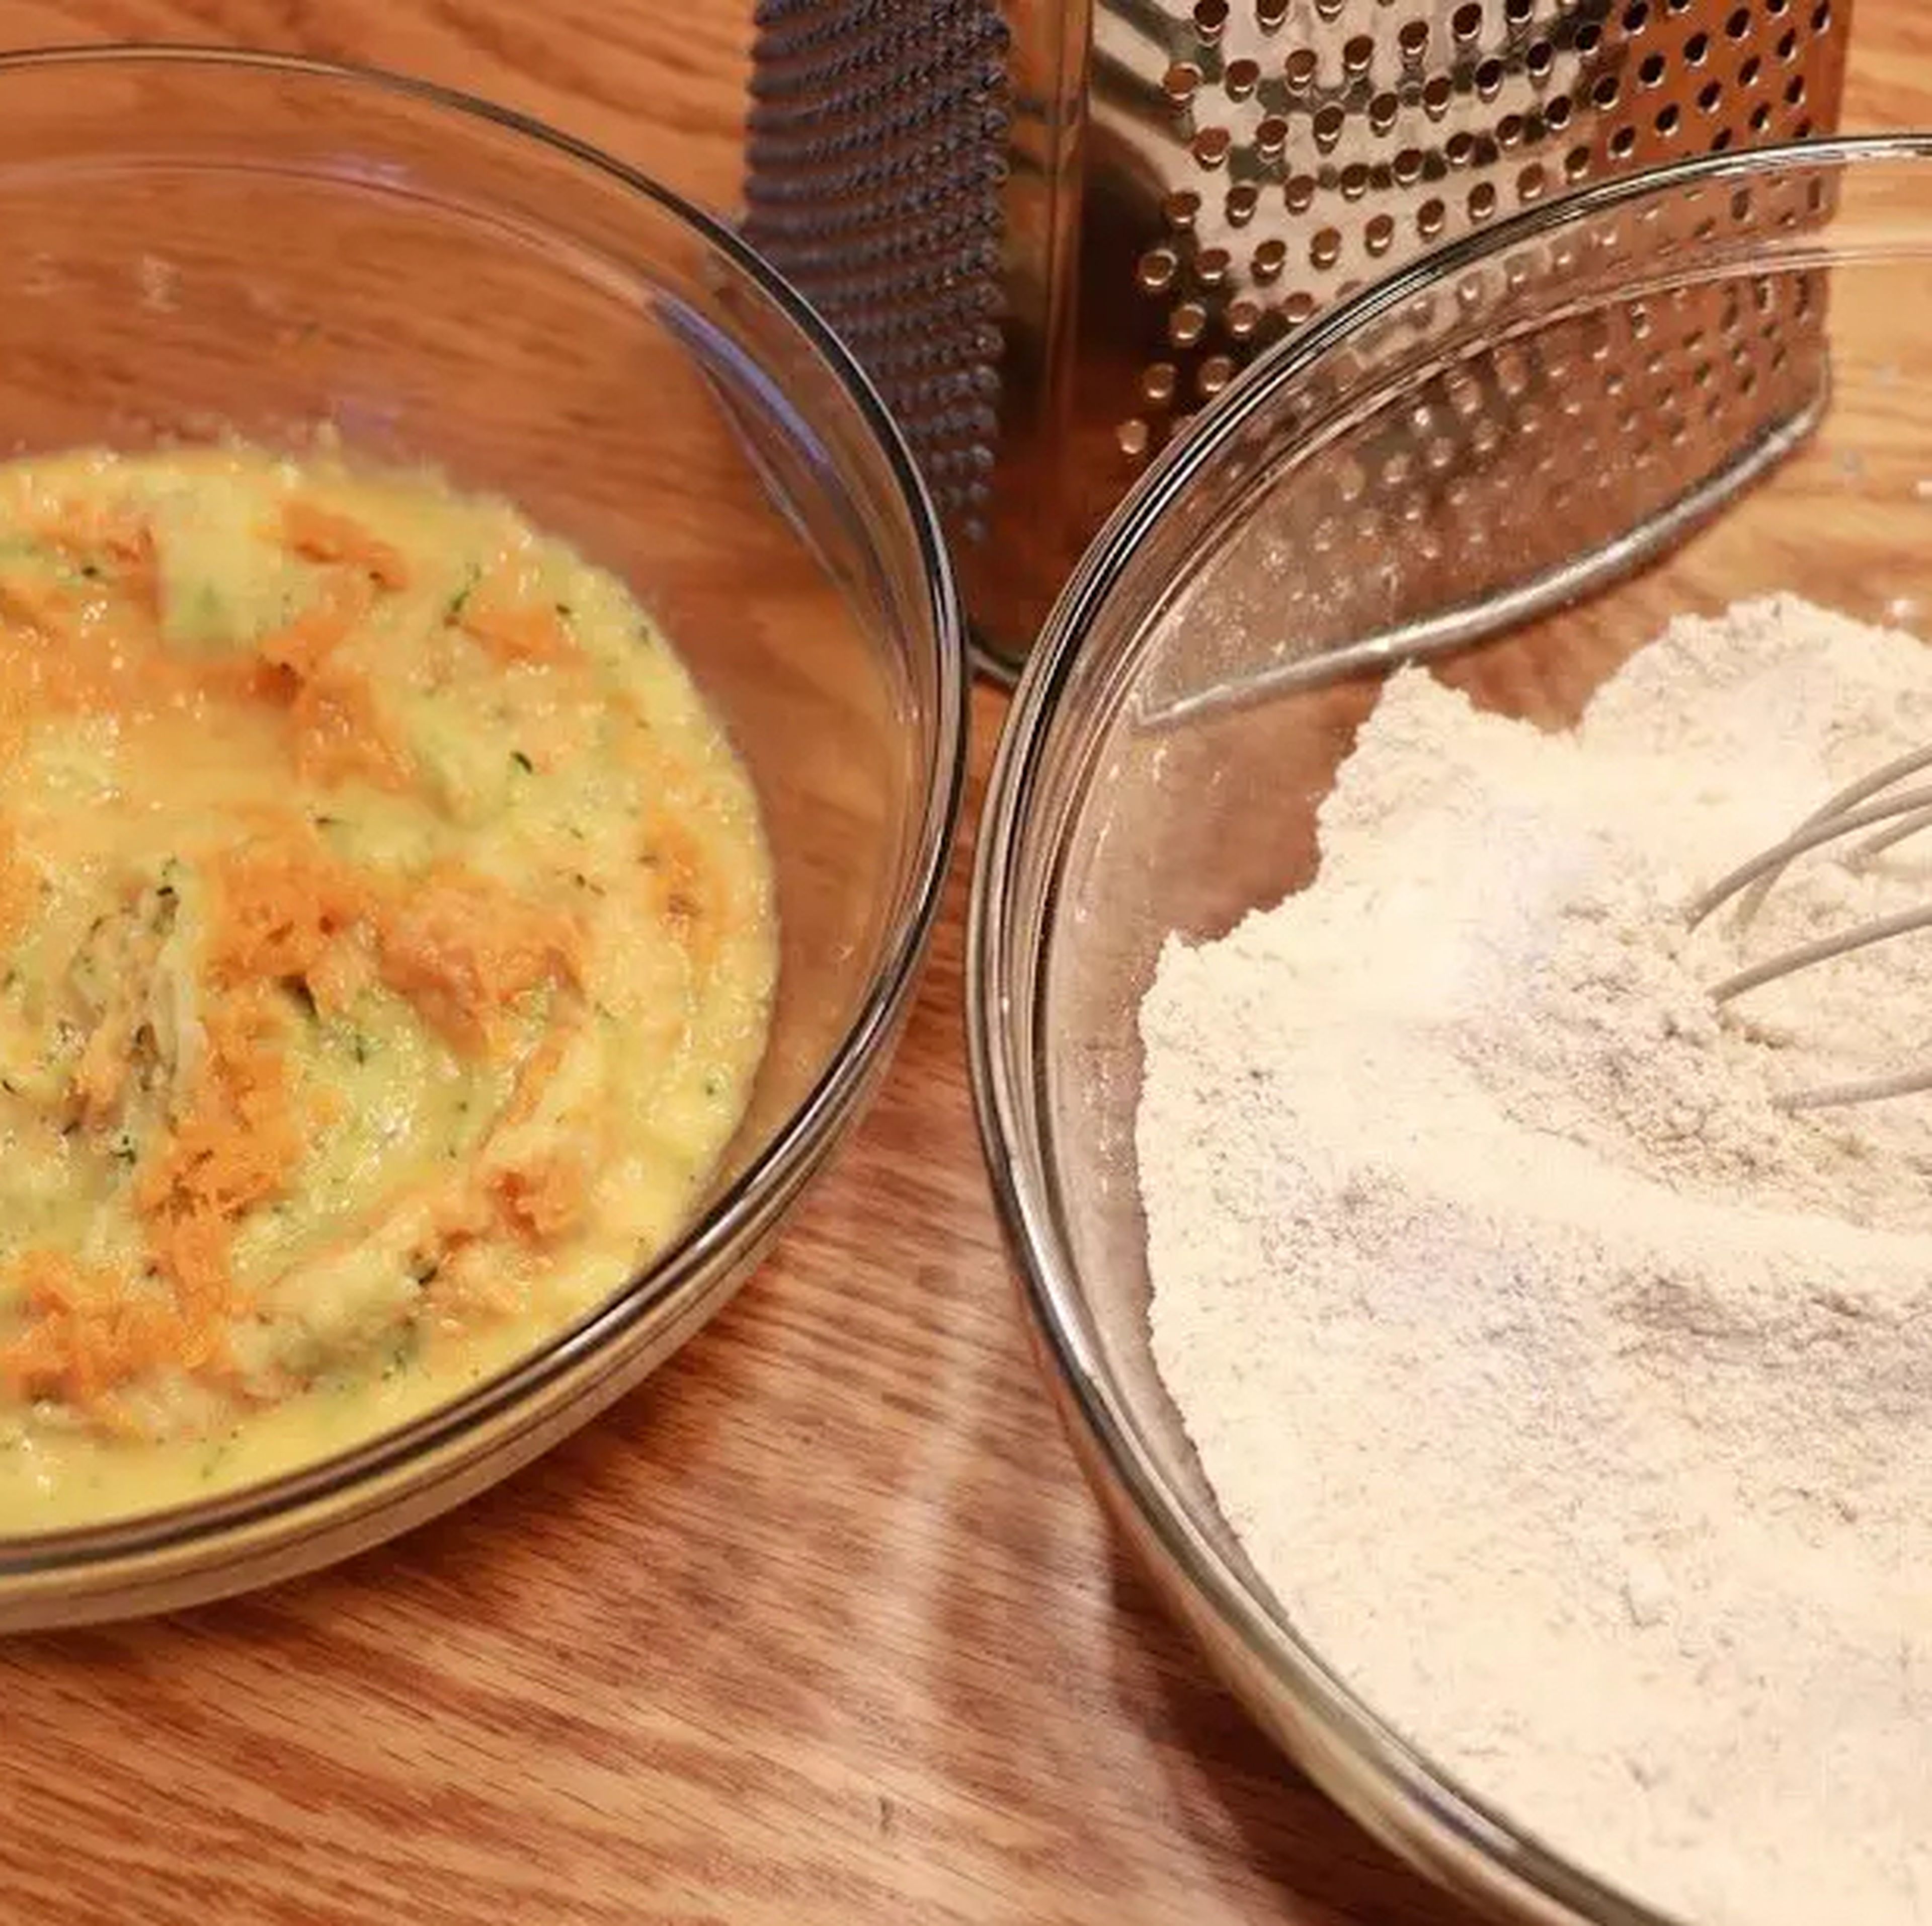 In a large mixing bowl, whisk together egg, applesauce, vanilla extract, grated zucchini and carrot.